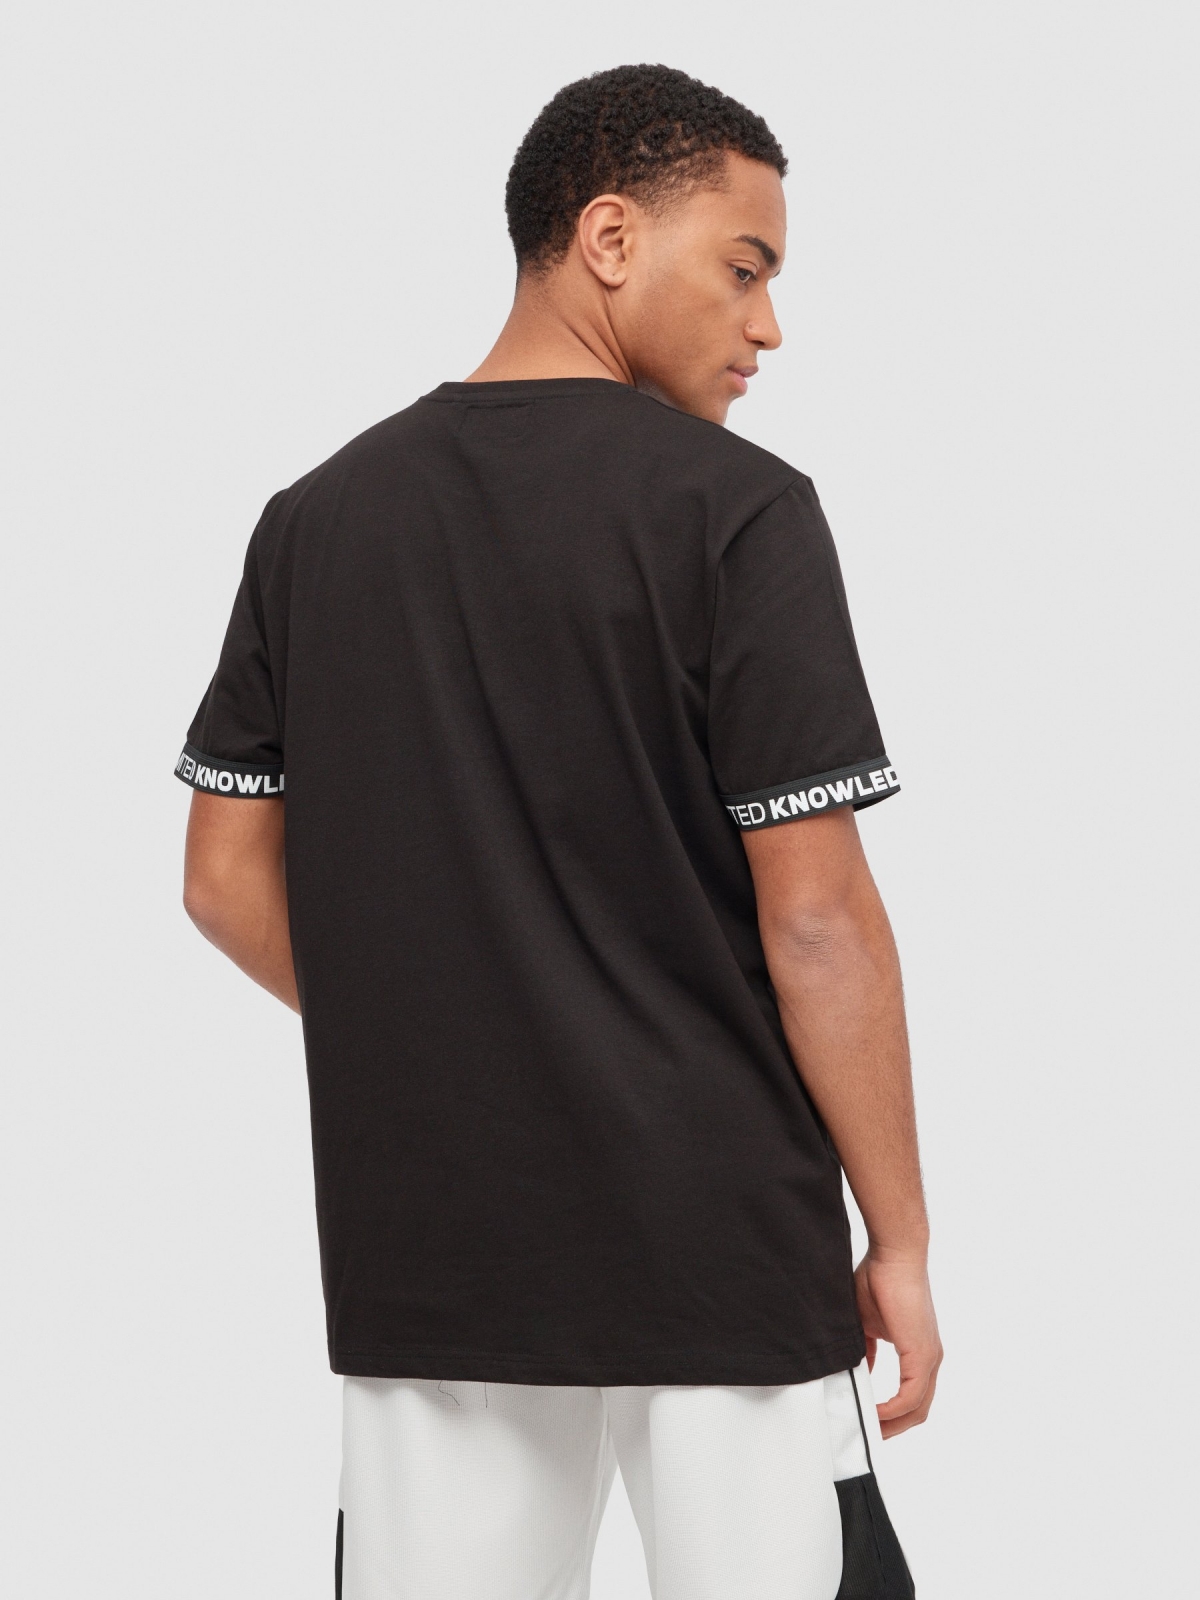 Contrast sleeve sports t-shirt black middle back view